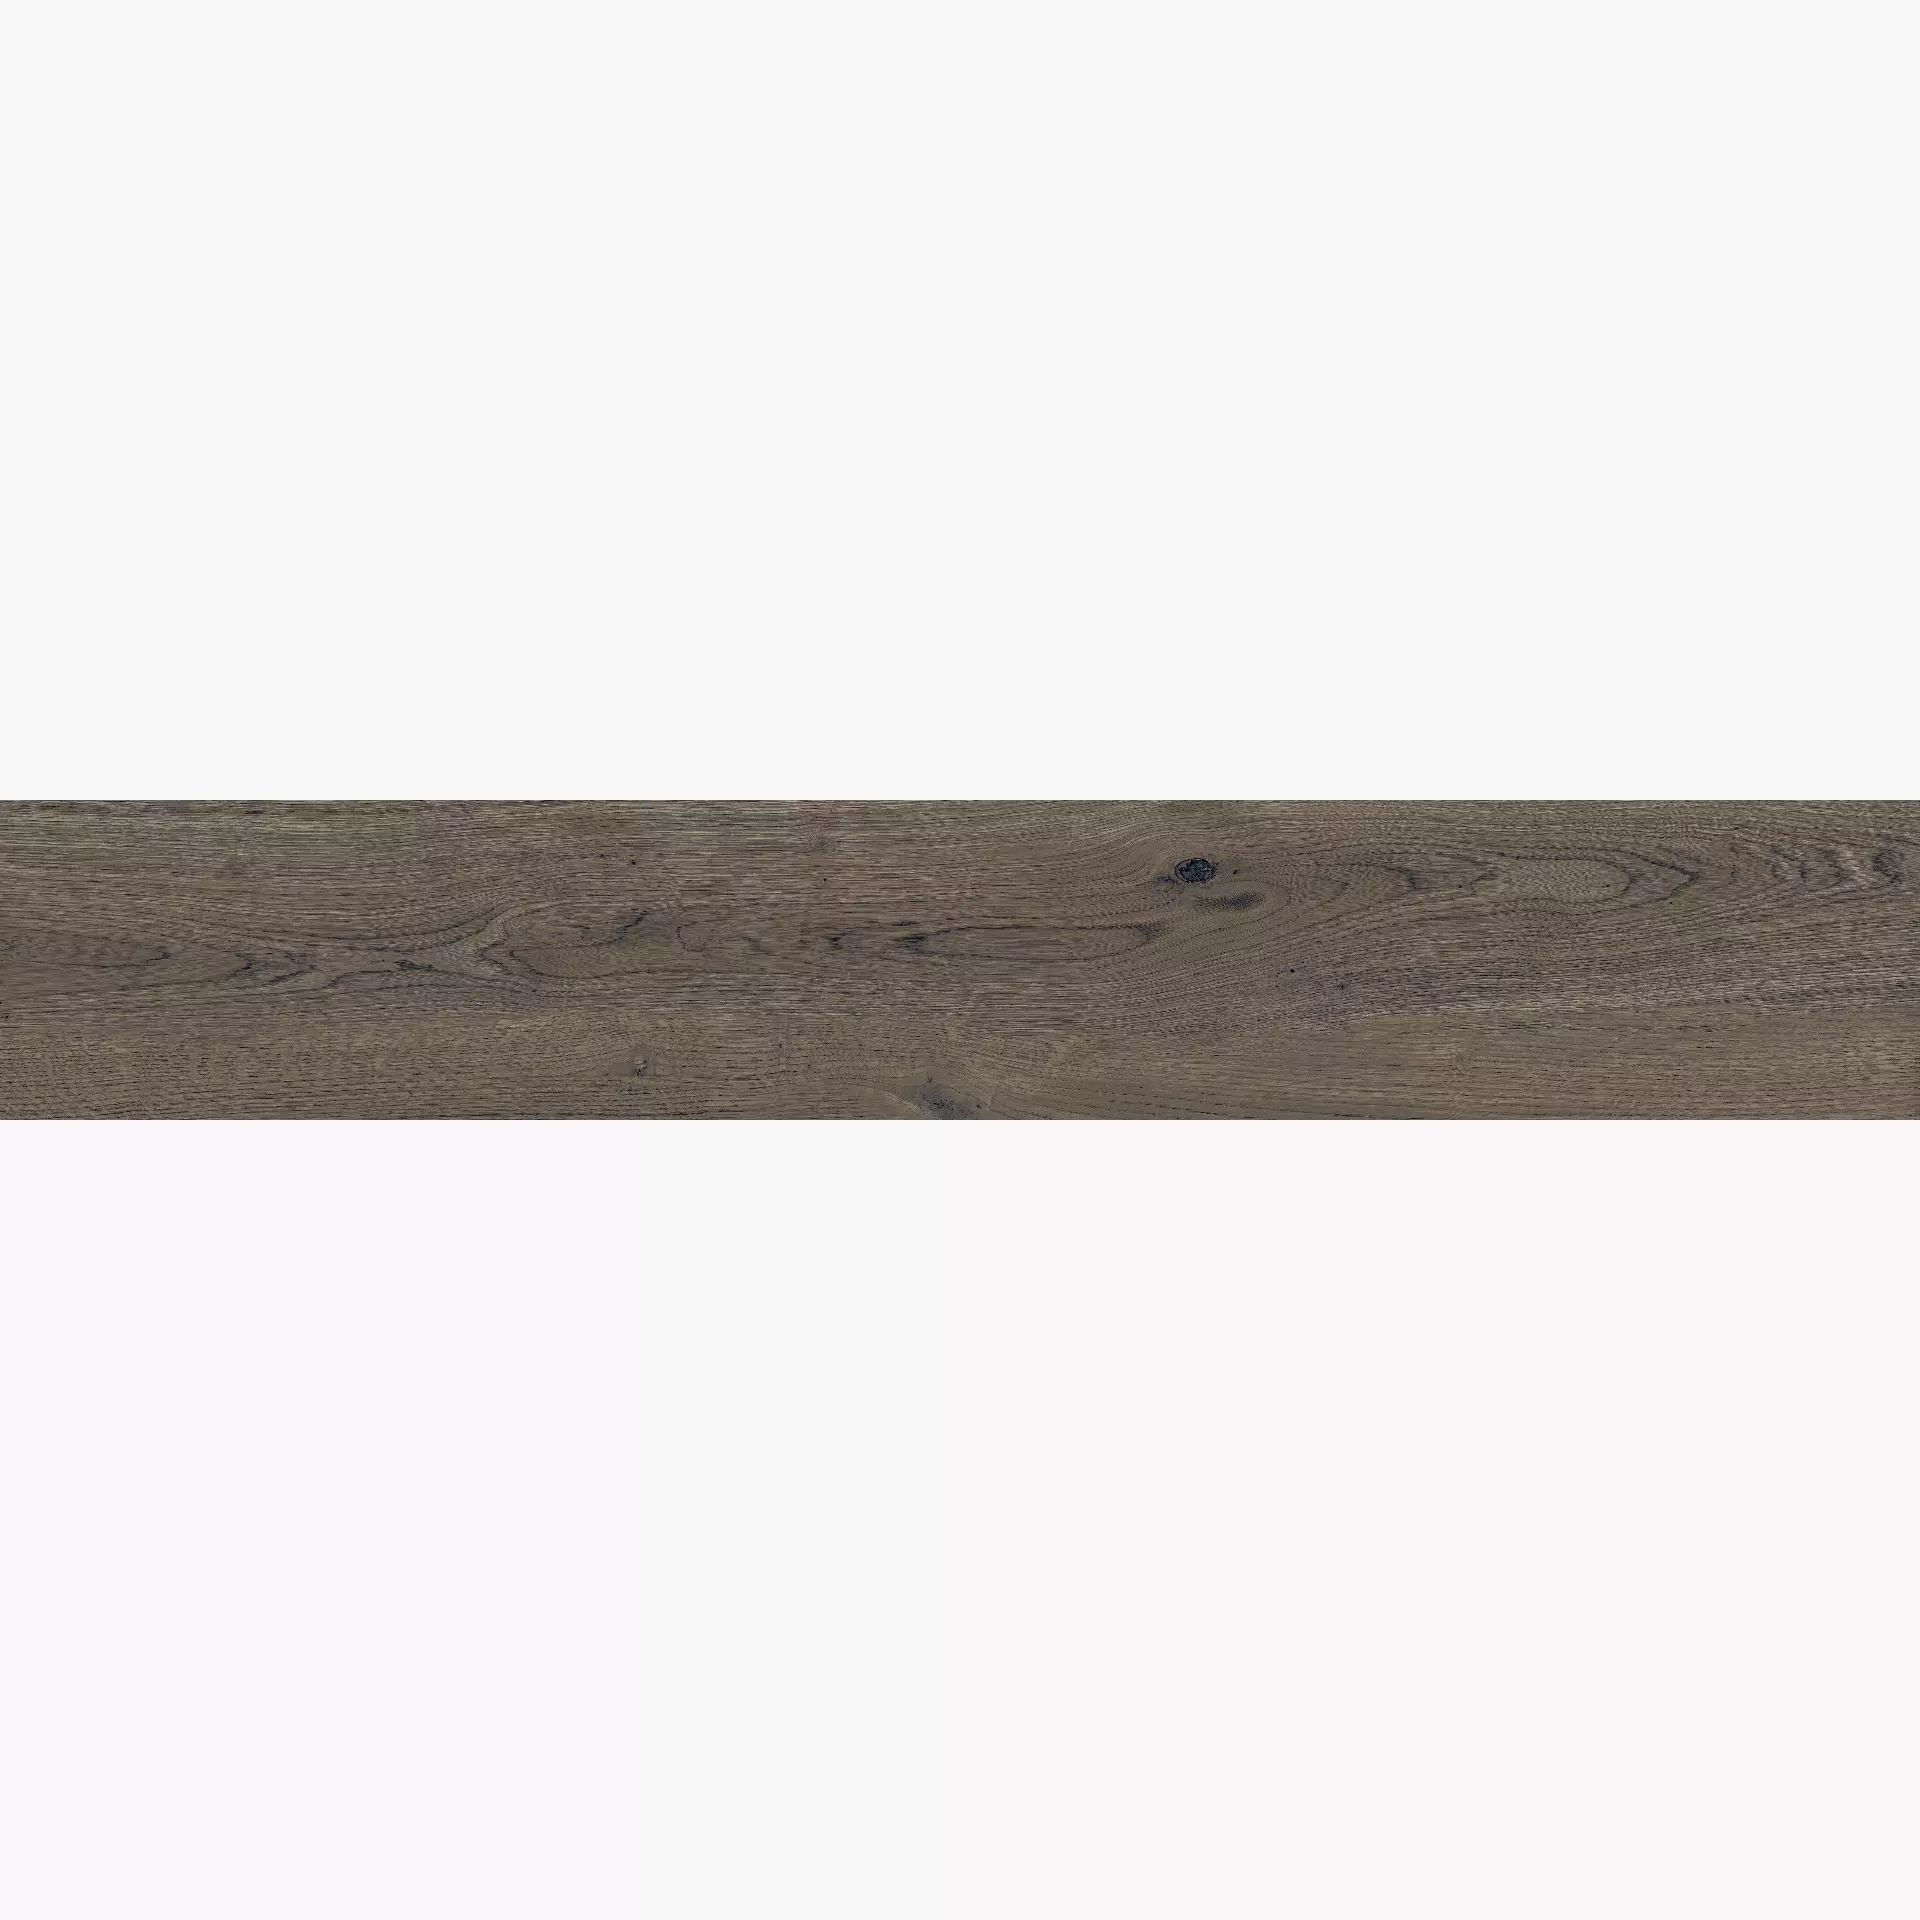 ABK Poetry Wood Mud Naturale PF60010061 20x120cm rectified 8,5mm